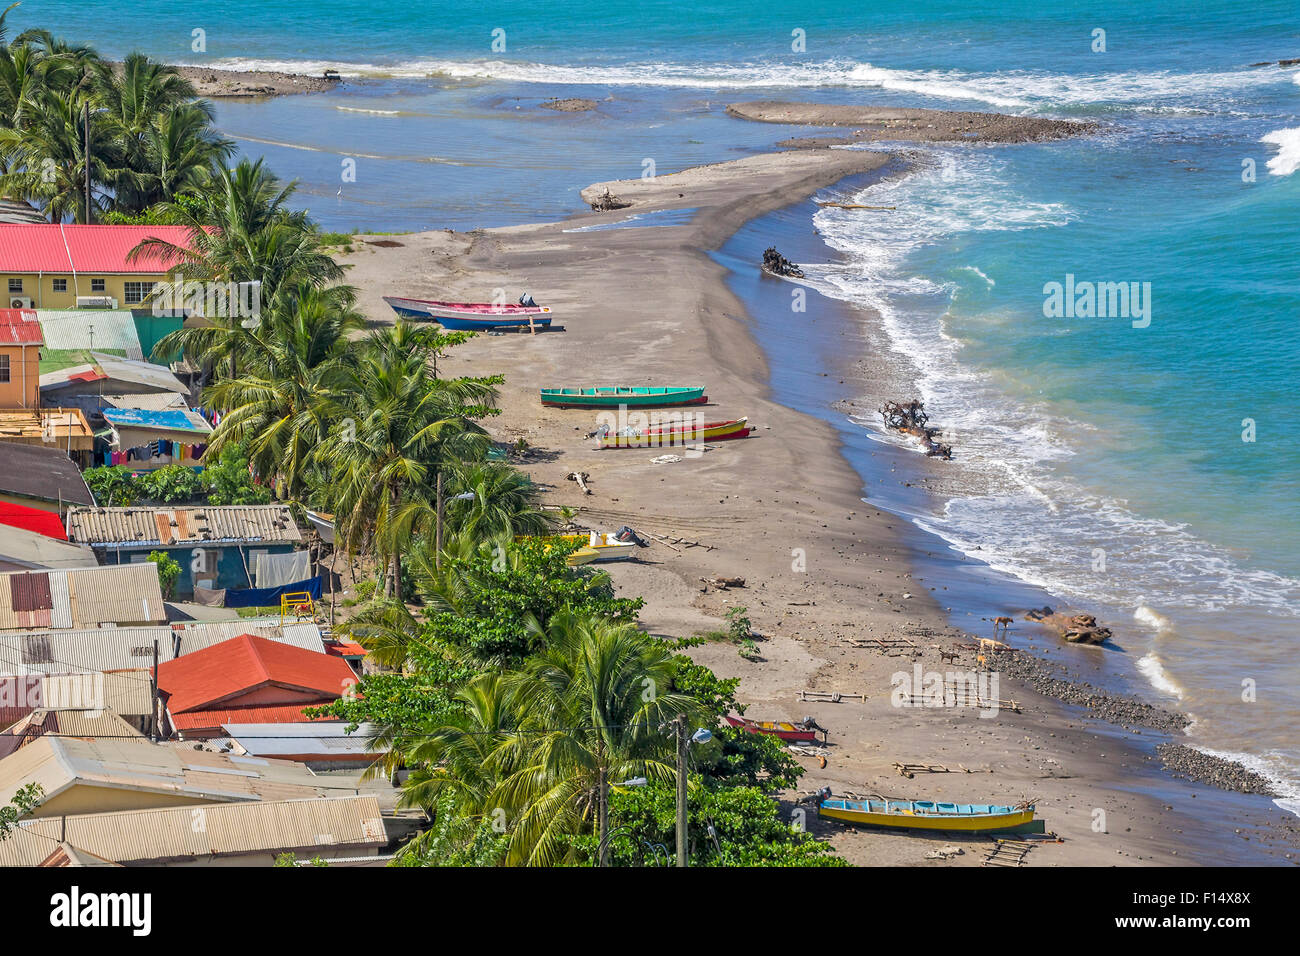 The Beach At Canaries St. Lucia West Indies Stock Photo